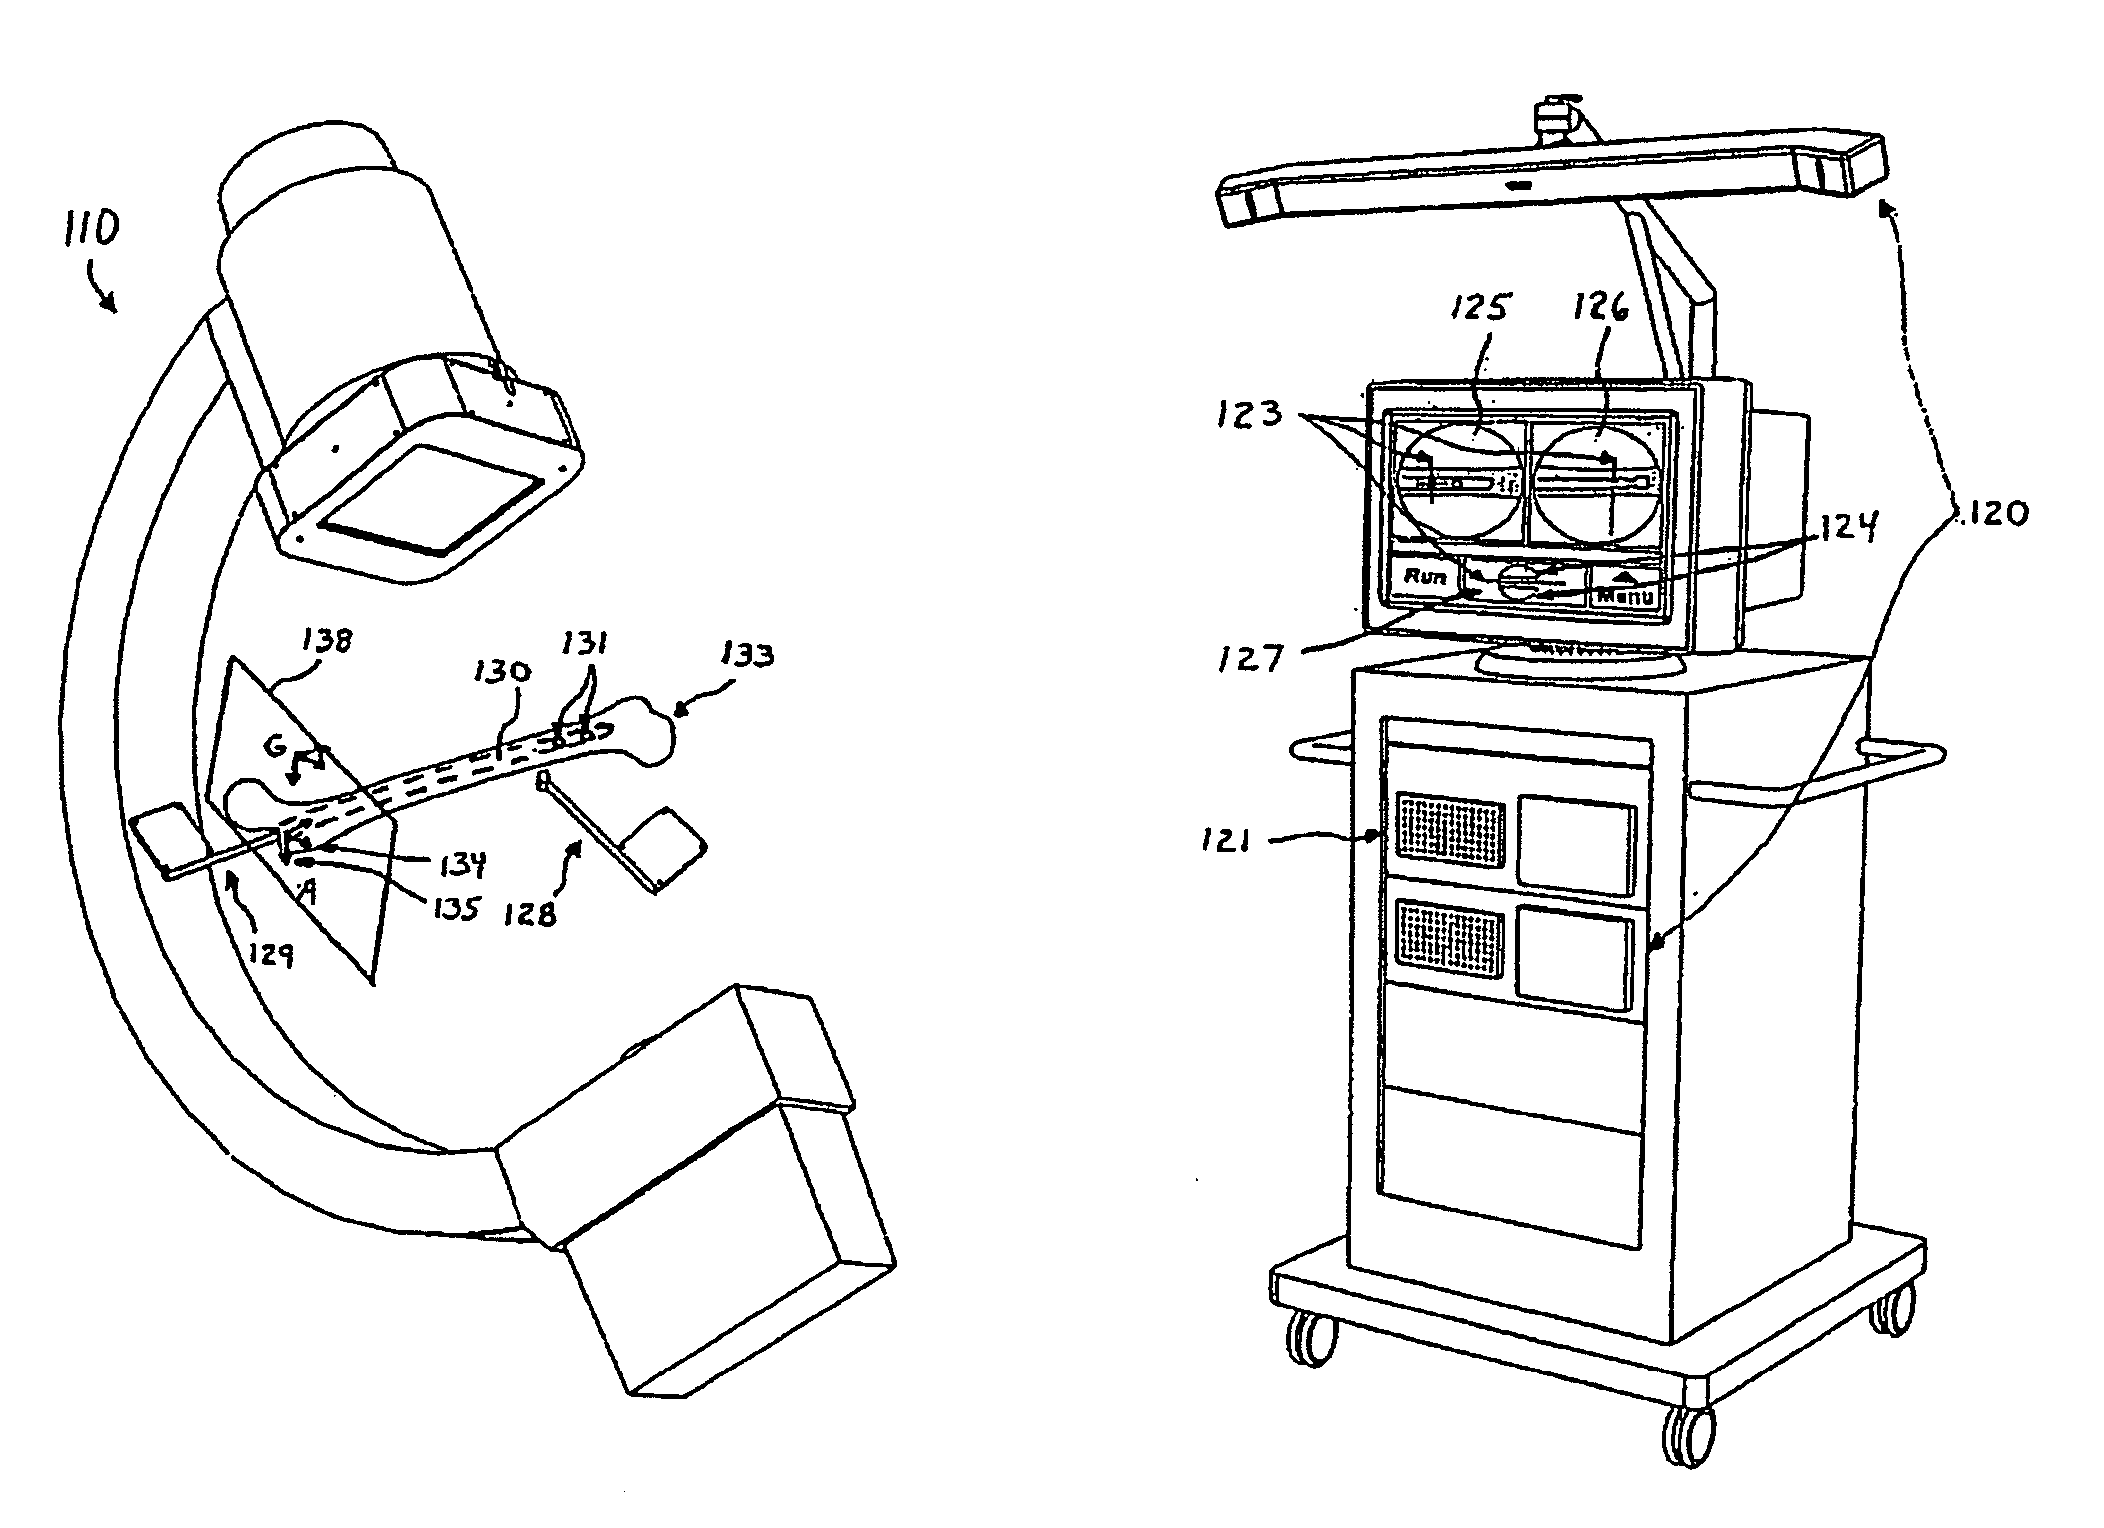 Computer assisted intramedullary rod surgery system with enhanced features